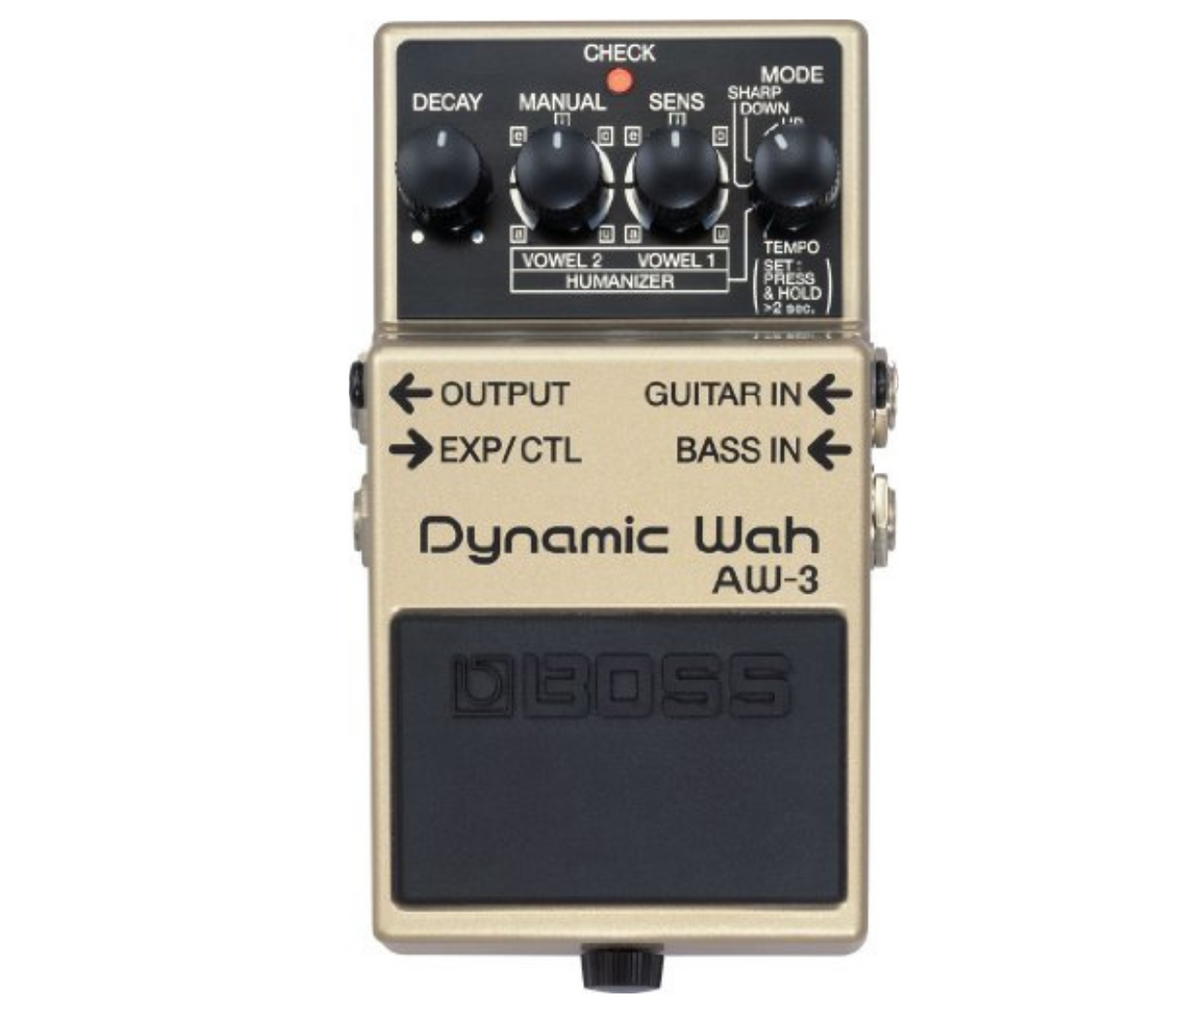 BOSS AW-3 Dynamic Wah Best Guitar Effects Pedal and Humanizer Mode with Bass Input